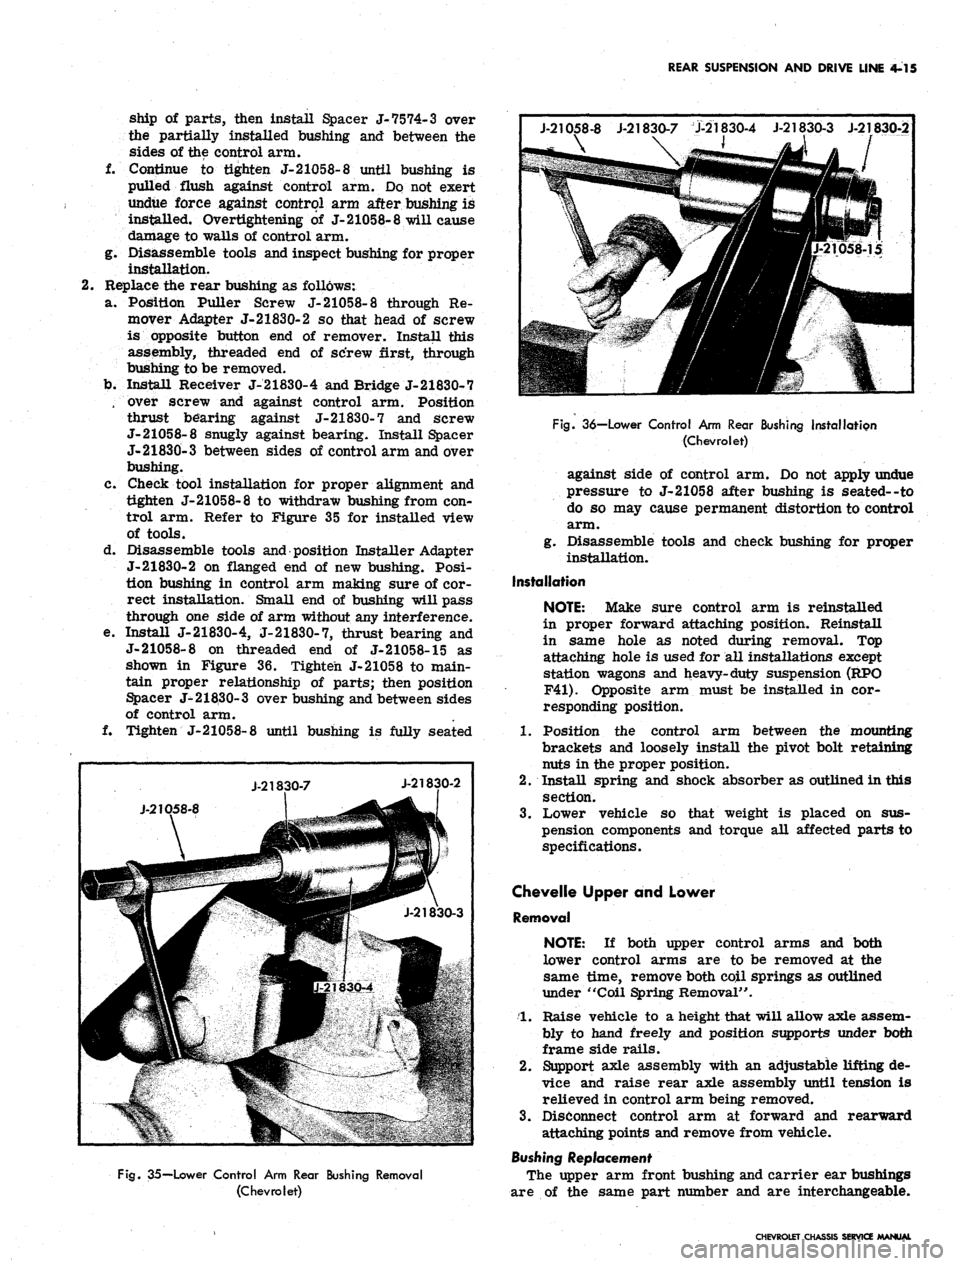 CHEVROLET CAMARO 1967 1.G Chassis Workshop Manual 
REAR SUSPENSION AND DRIVE LINE 4-15

ship of parts, then install Spacer J-
 7574-
 3 over

the partially installed bushing and between the

sides of the control arm.

f. Continue to tighten J-
 21058